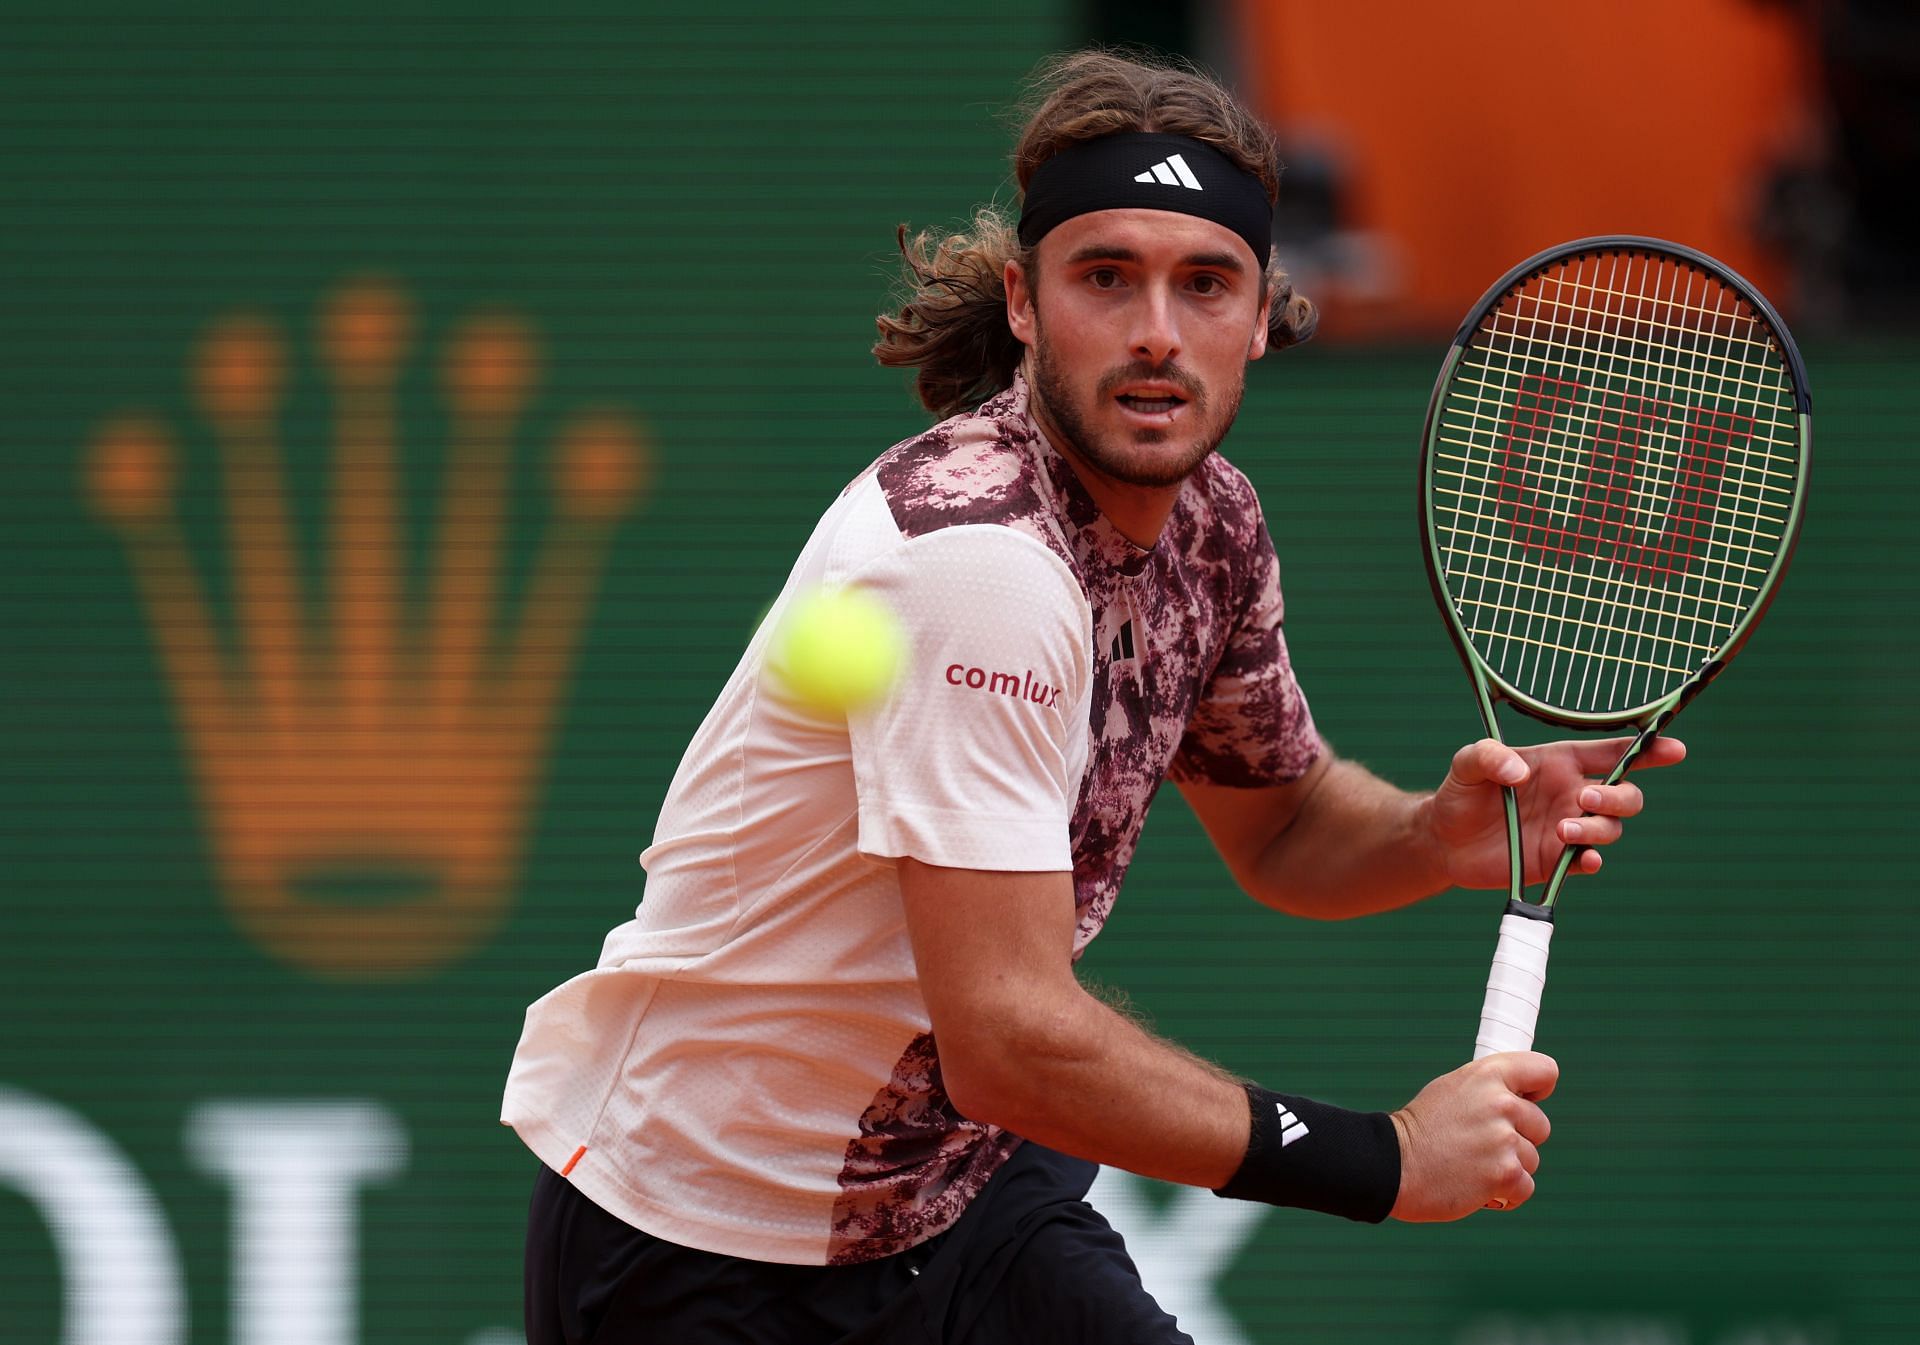 Stefanos Tsitsipas at the Rolex Monte-Carlo Masters - Day Five